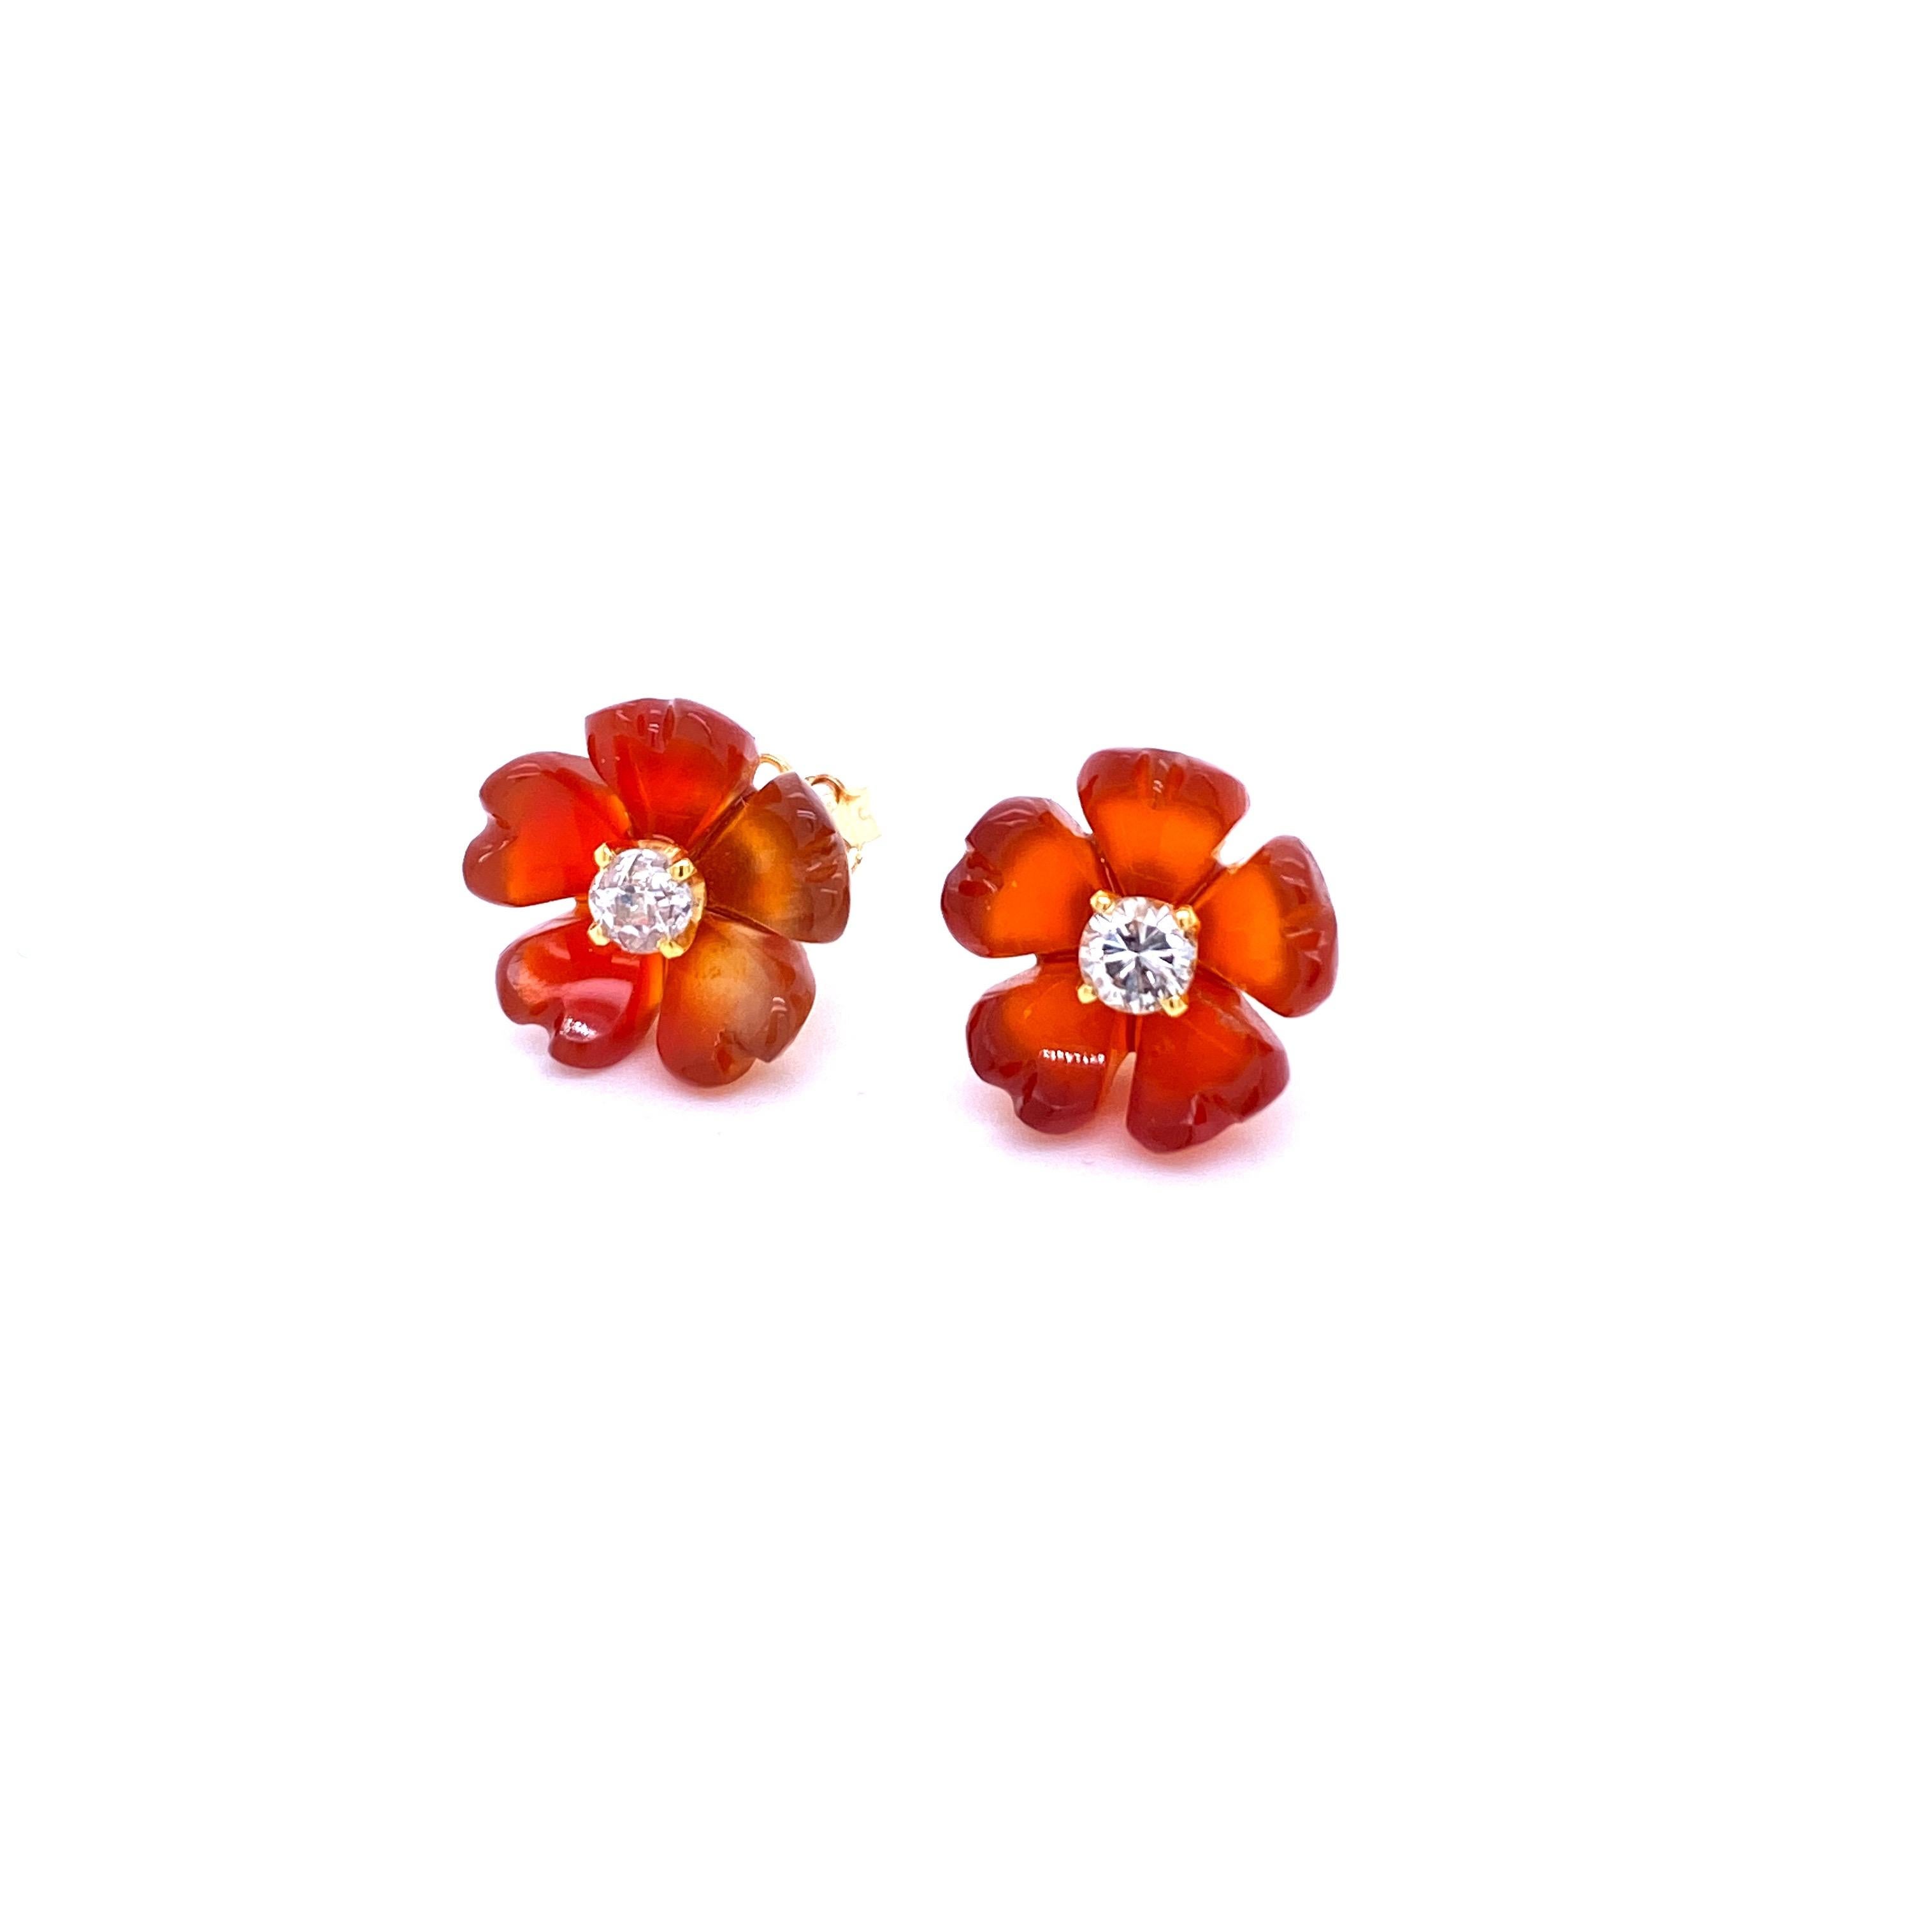 An unusual pair of vintage diamond flower design earrings set in 18k Gold and hand-carved Carnelian. They are set with two large Round brilliant cut Diamonds in the center  for a total weight of 0.50 ct. All graded color F-G clarity Vvs1. 
Origin